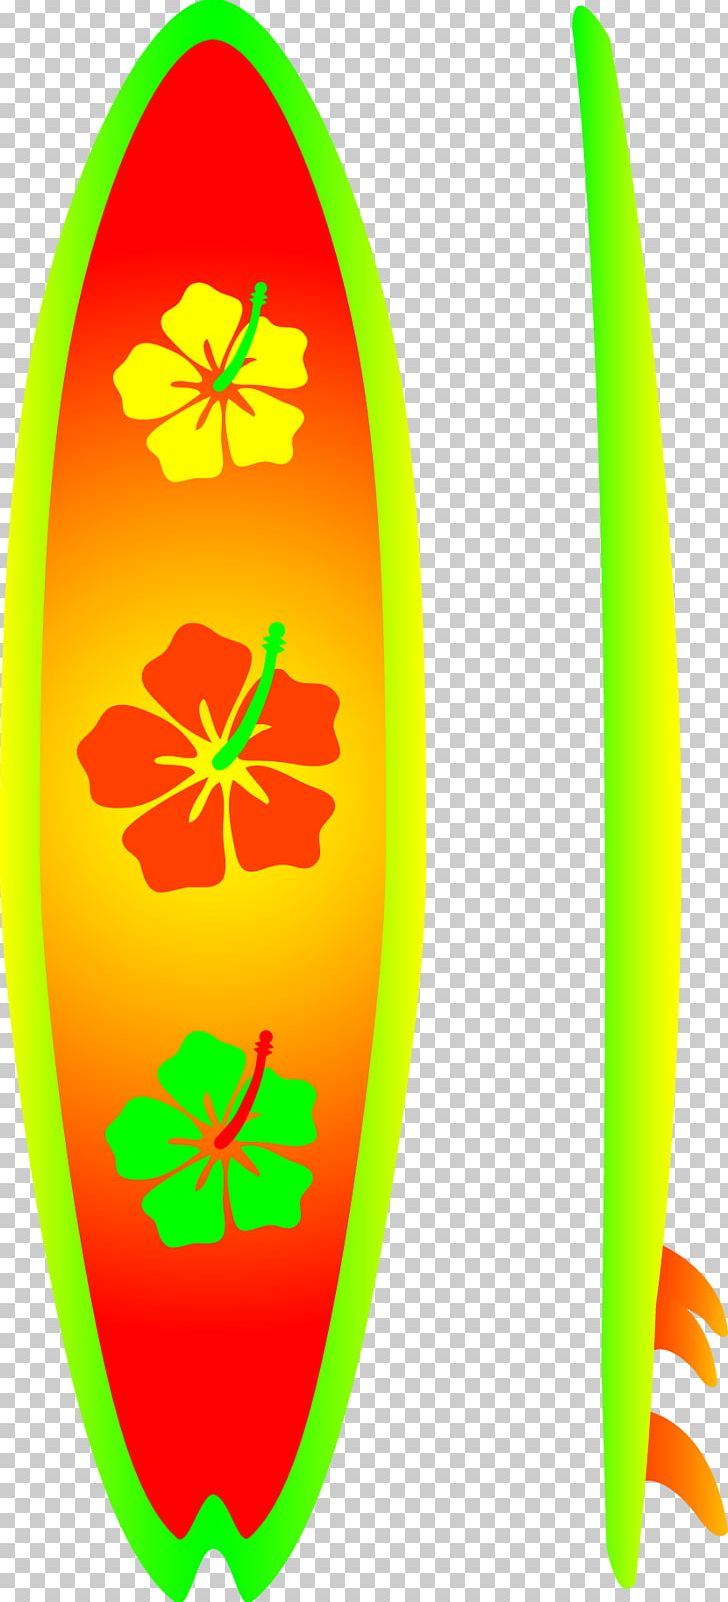 Surfboard Surfing PNG, Clipart, Art, Clip Art, Document, Download, Grass Free PNG Download